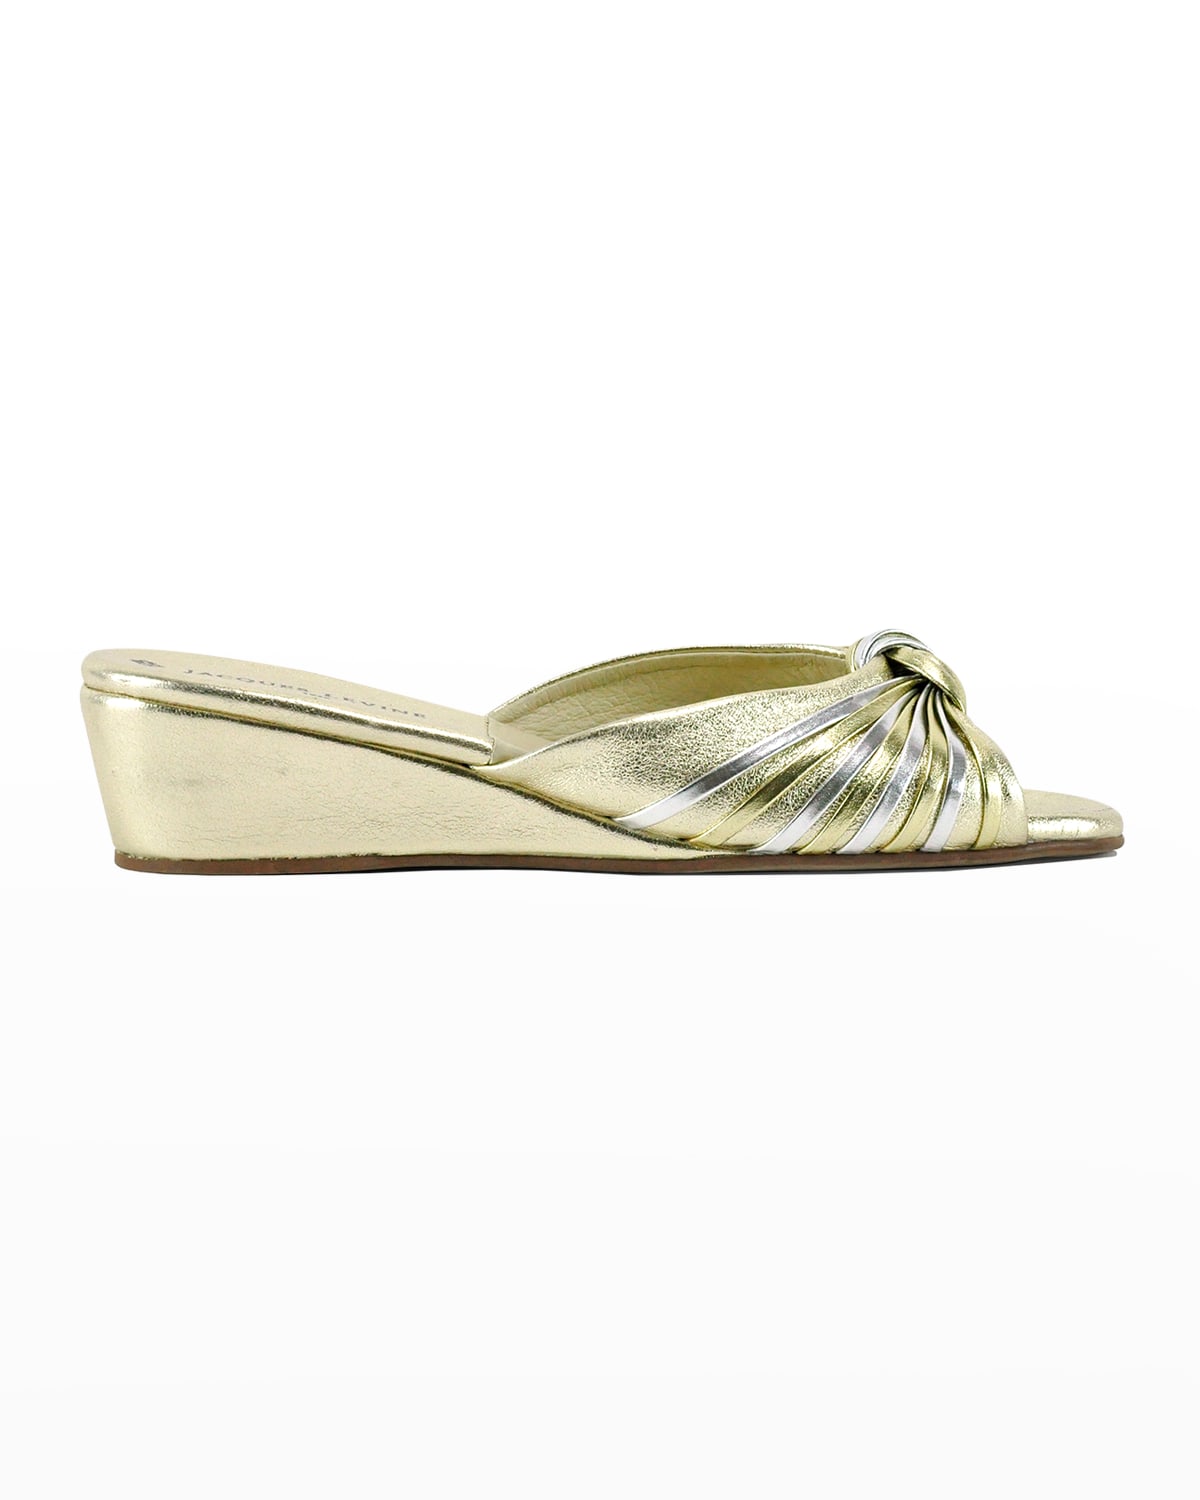 Jacques Levine Metallic Leather Open-Toe Slippers